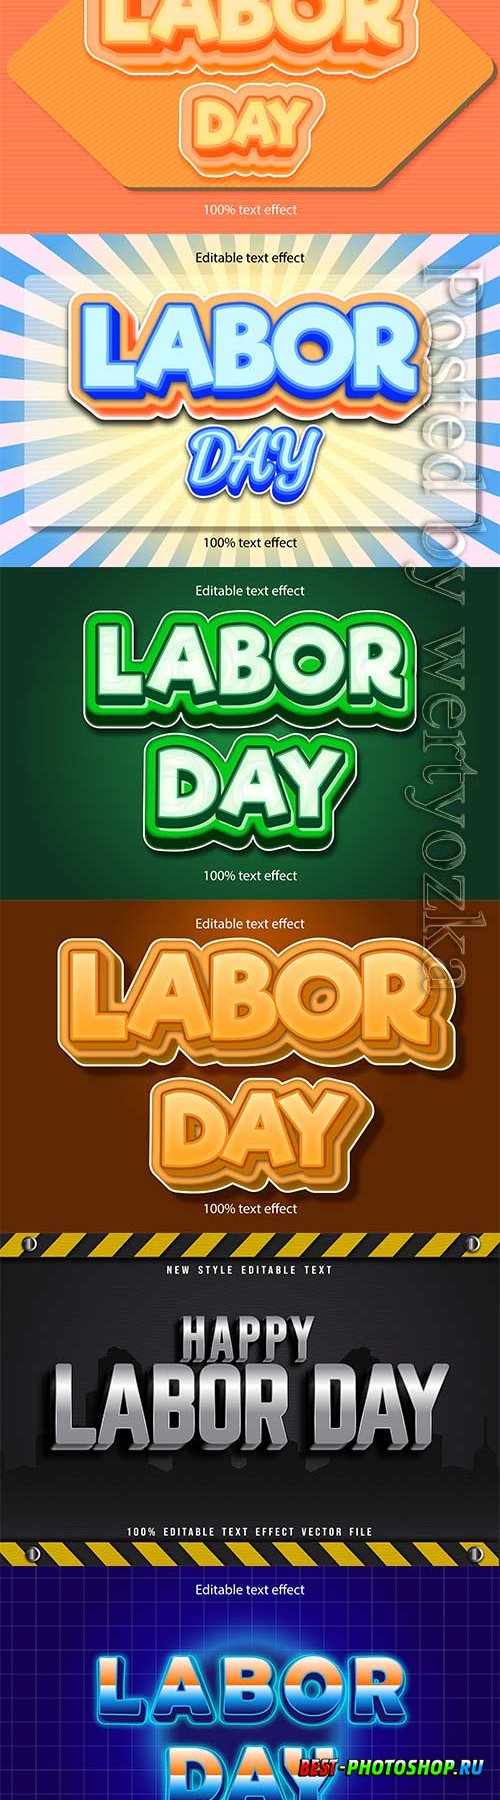 Labor day editable text effect vol 10